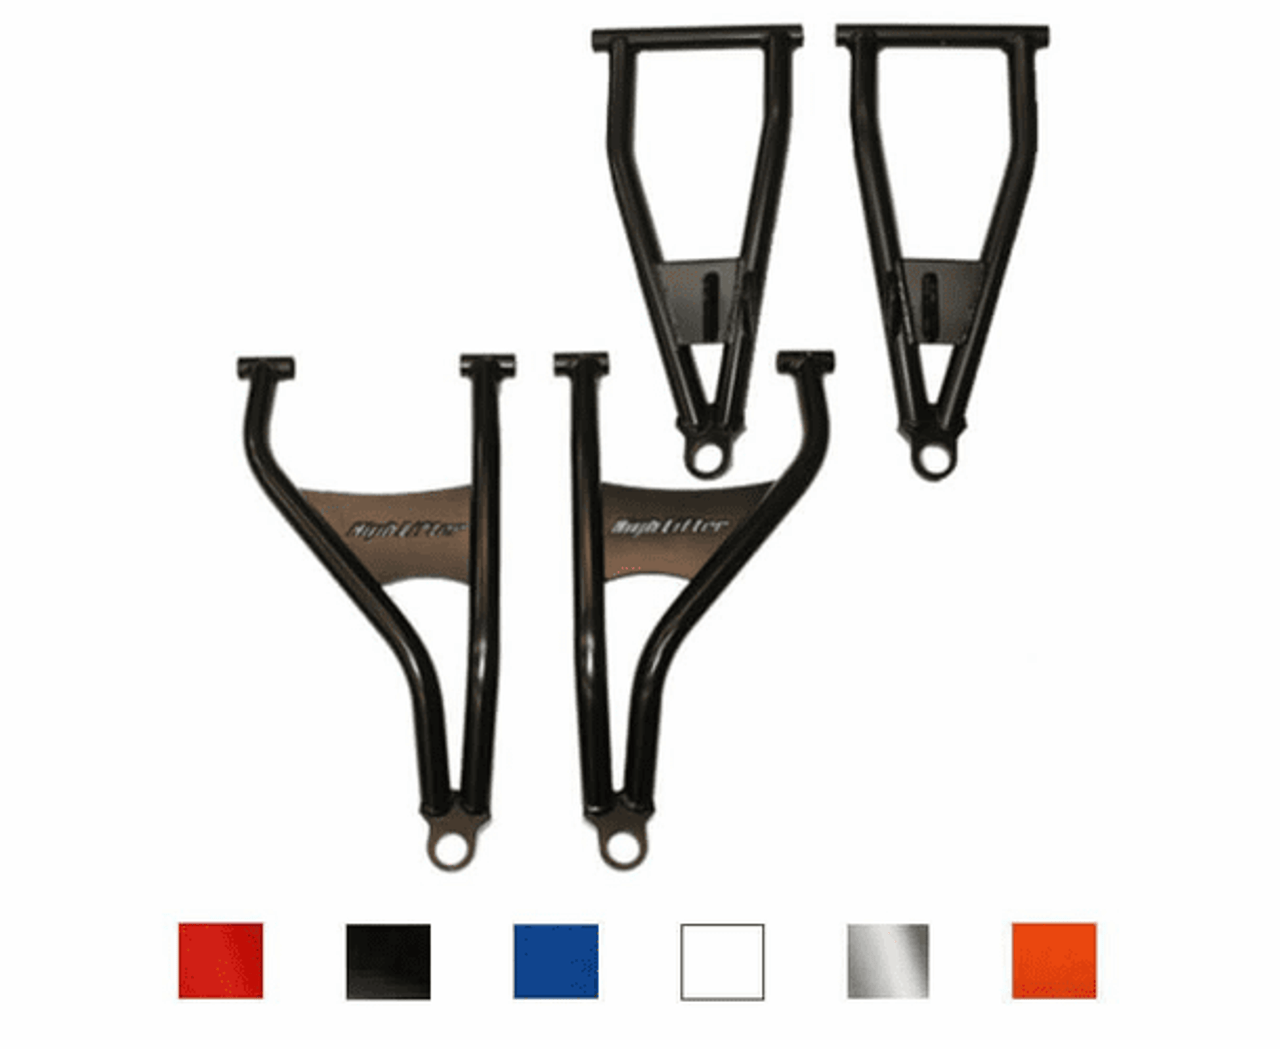 UTV Side X Side Max Clearance Front Forward Control Arms 2013-21 Full Size Polaris Ranger